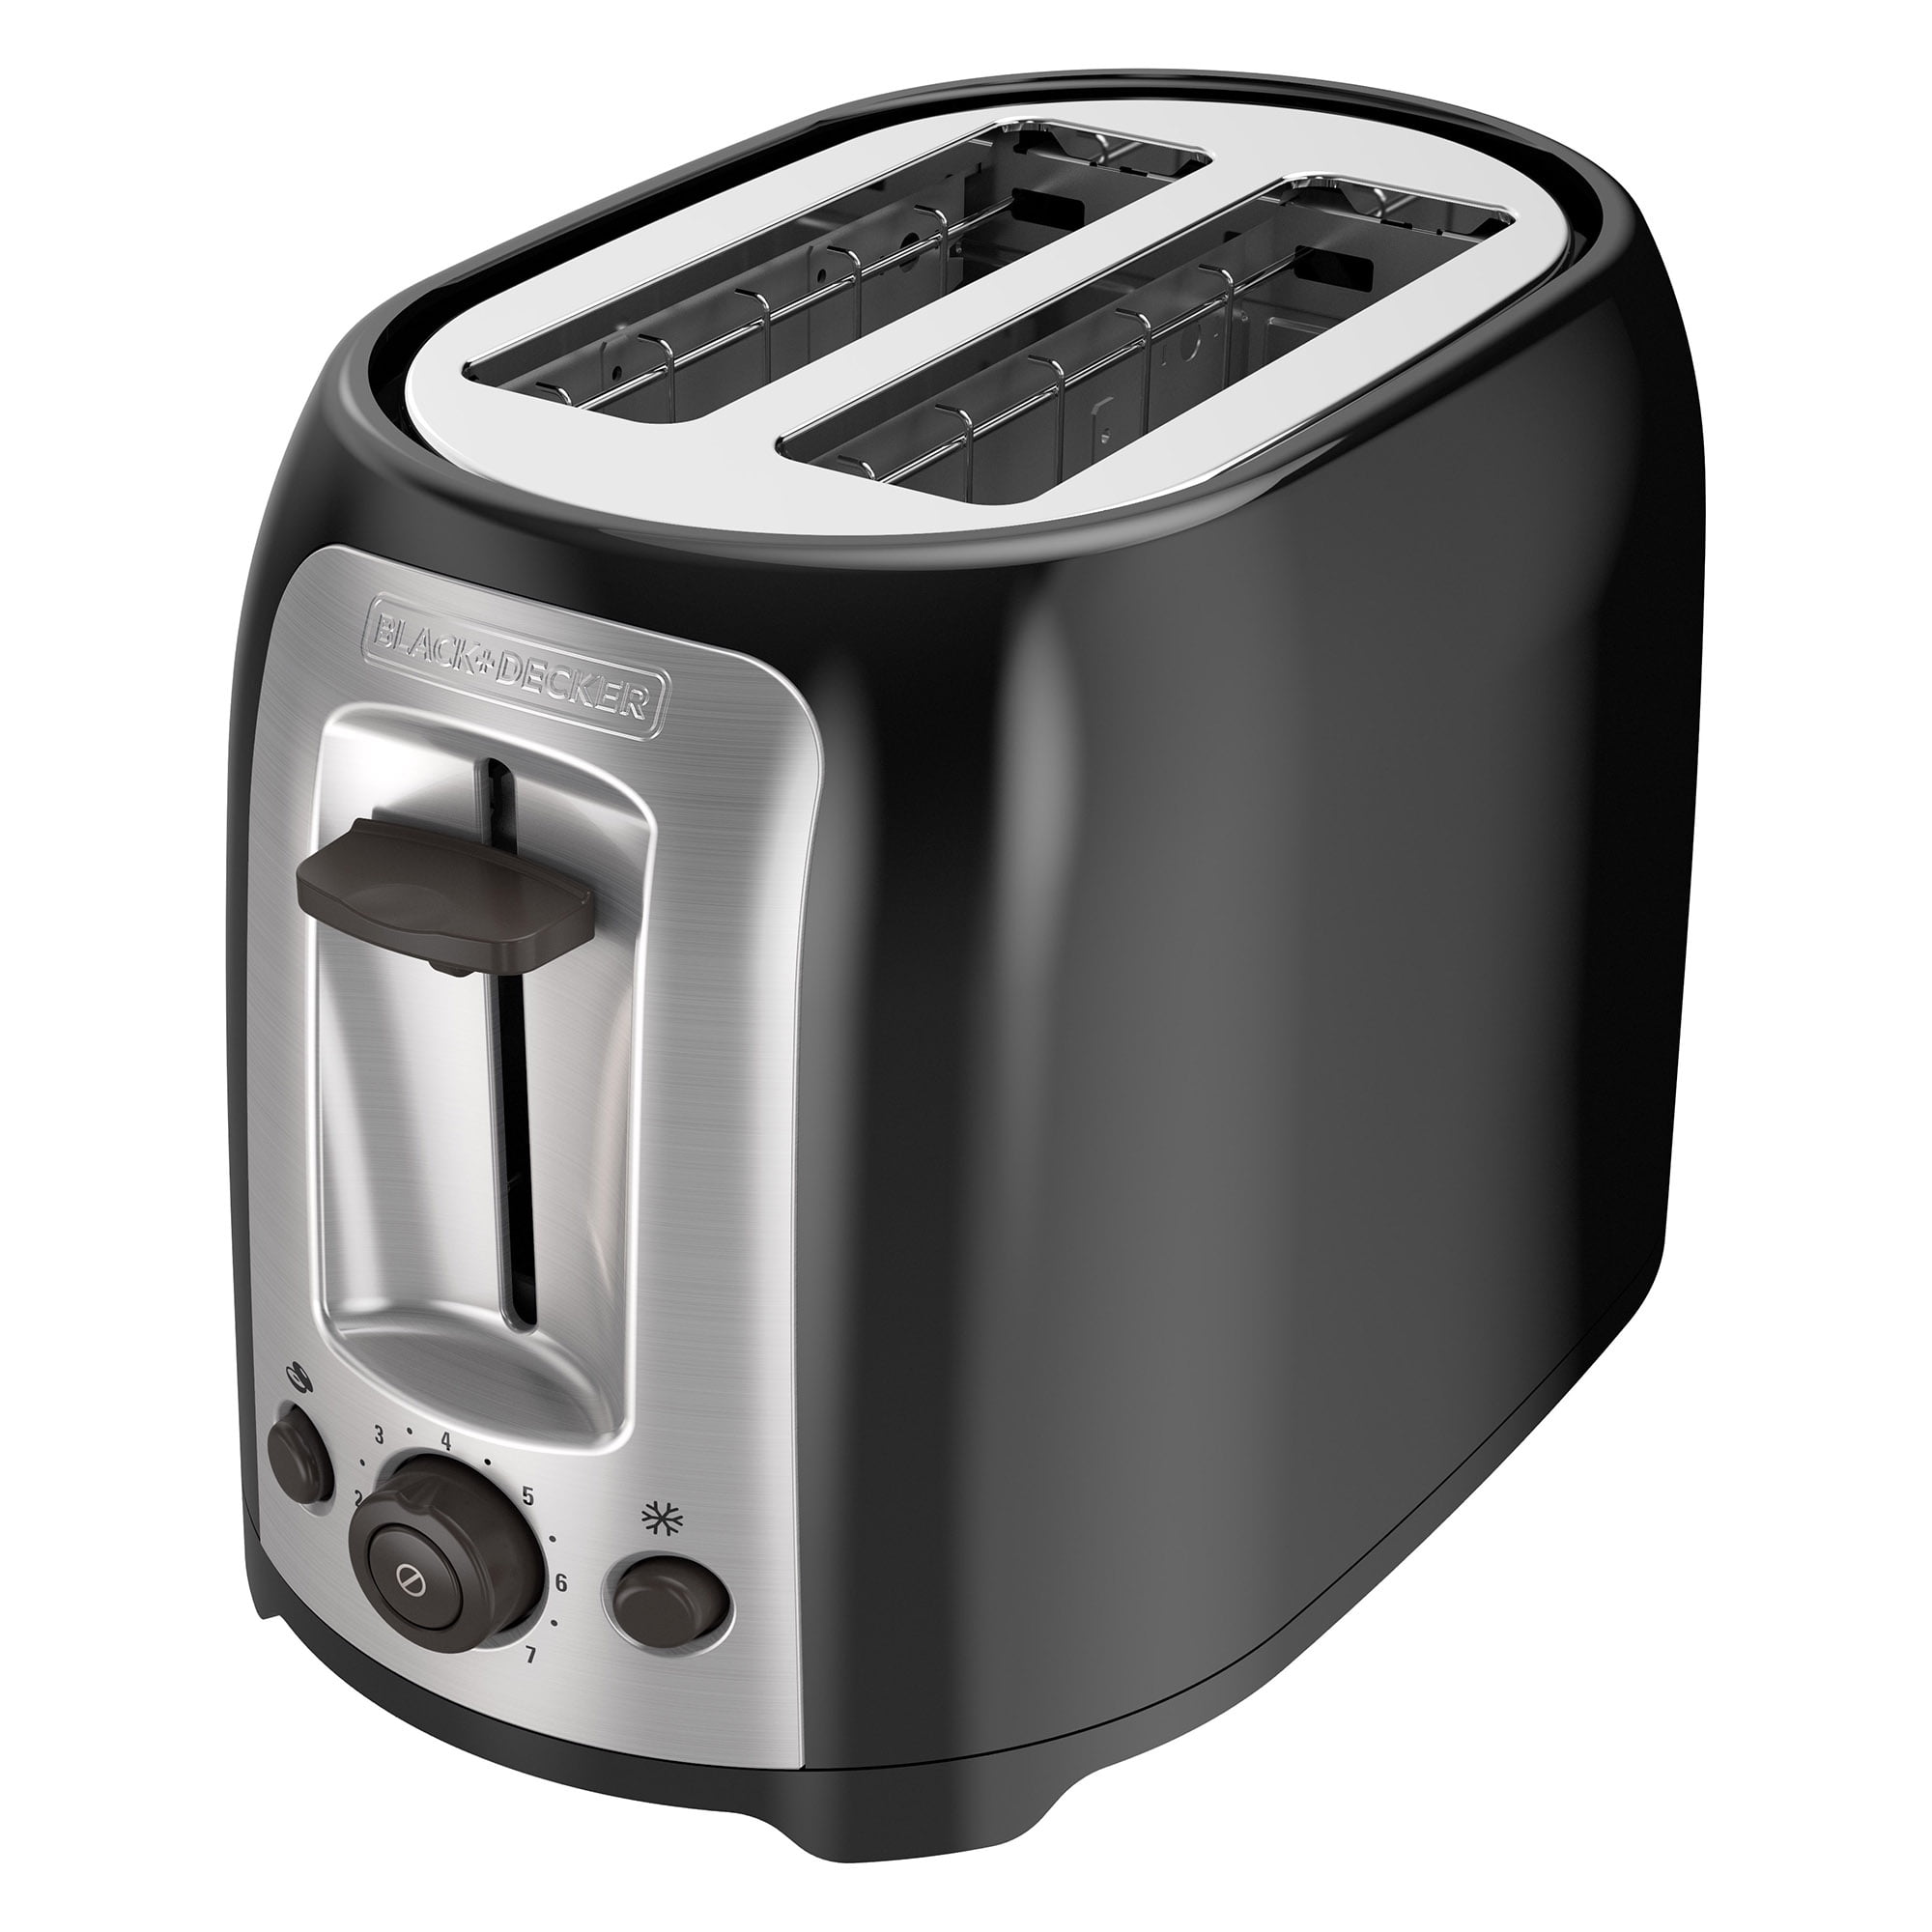 Black+decker 2-Slice Toaster with 7 Toast Shade Settings, Extra-Wide Slots for Bagels, Stainless Steel Exterior Finish